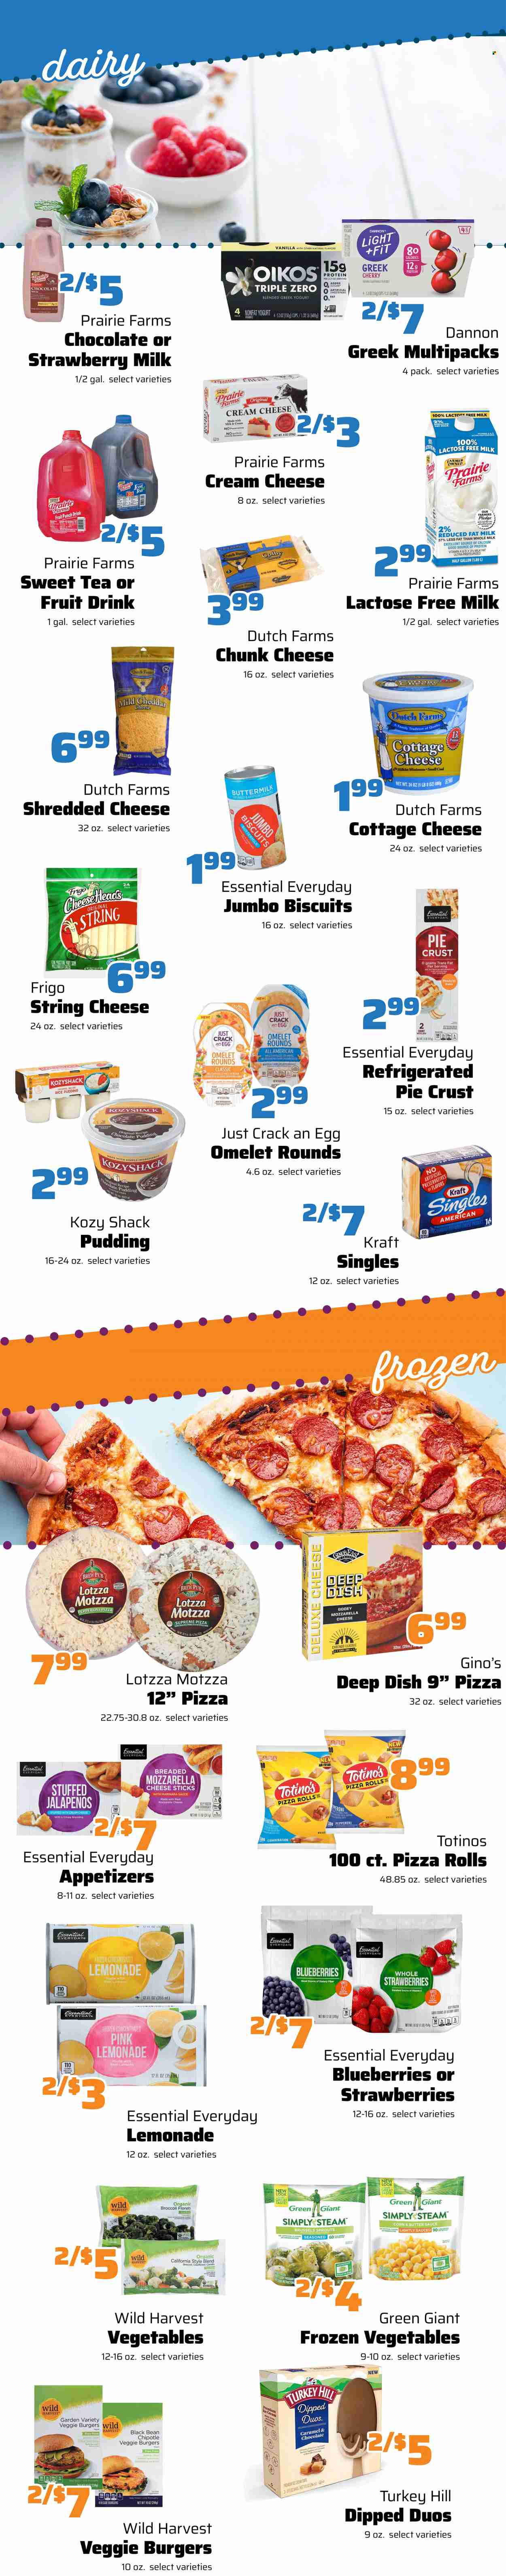 thumbnail - County Market Flyer - 09/28/2022 - 10/04/2022 - Sales products - pizza rolls, corn, Wild Harvest, green pepper, cherries, pizza, veggie burger, Kraft®, bacon, ham, sausage, pepperoni, Colby cheese, cottage cheese, mild cheddar, sandwich slices, shredded cheese, string cheese, cheddar, Kraft Singles, chunk cheese, greek yoghurt, chocolate pudding, yoghurt, Oikos, Dannon, rice pudding, buttermilk, lactose free milk, cage free eggs, ice cream bars, frozen vegetables, cheese sticks, milk chocolate, biscuit, pie crust, lemonade, juice, fruit drink, ice tea, fruit punch, smoothie, lemons. Page 1.